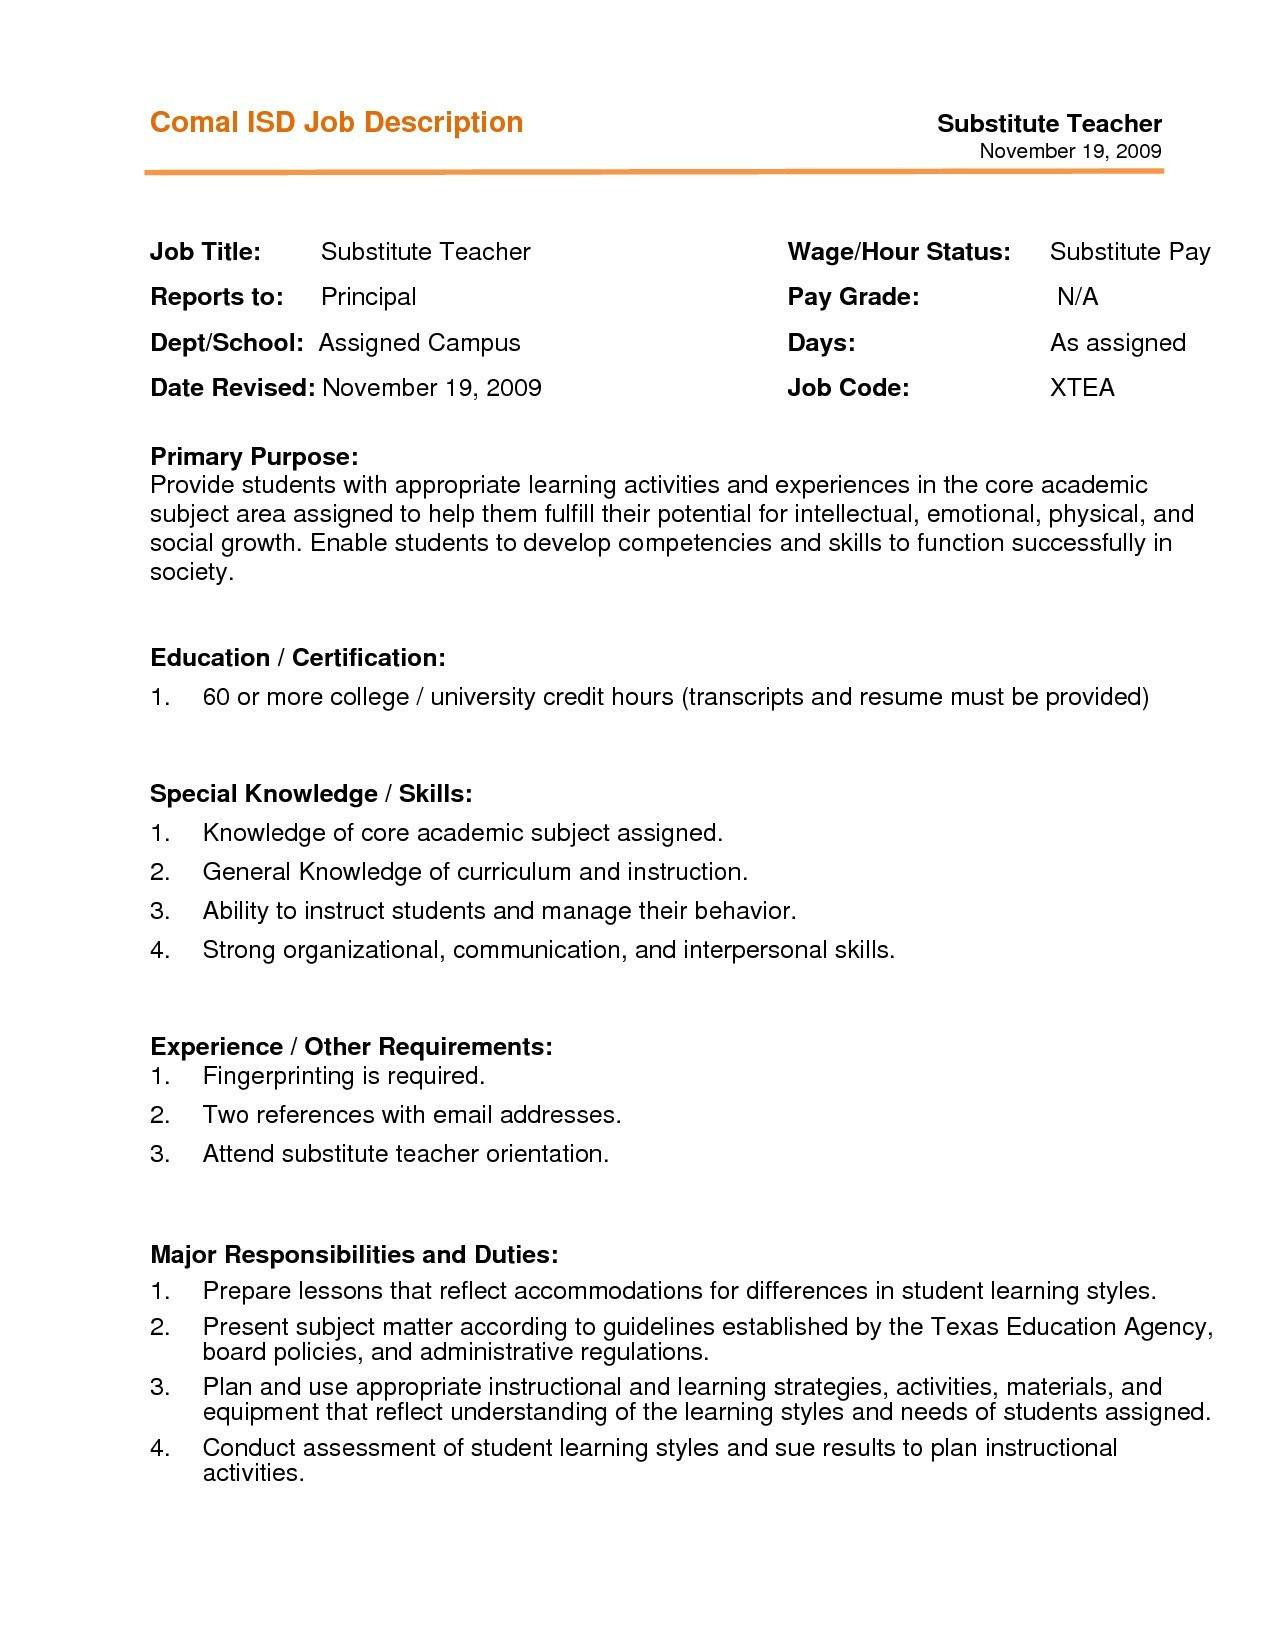 How To Type A Resume Example Of Resume Personal Information Beautiful Stock How To Type Resume Best Sample Personal Information In Resume Of Example Of Resume Personal Information how to type a resume|wikiresume.com